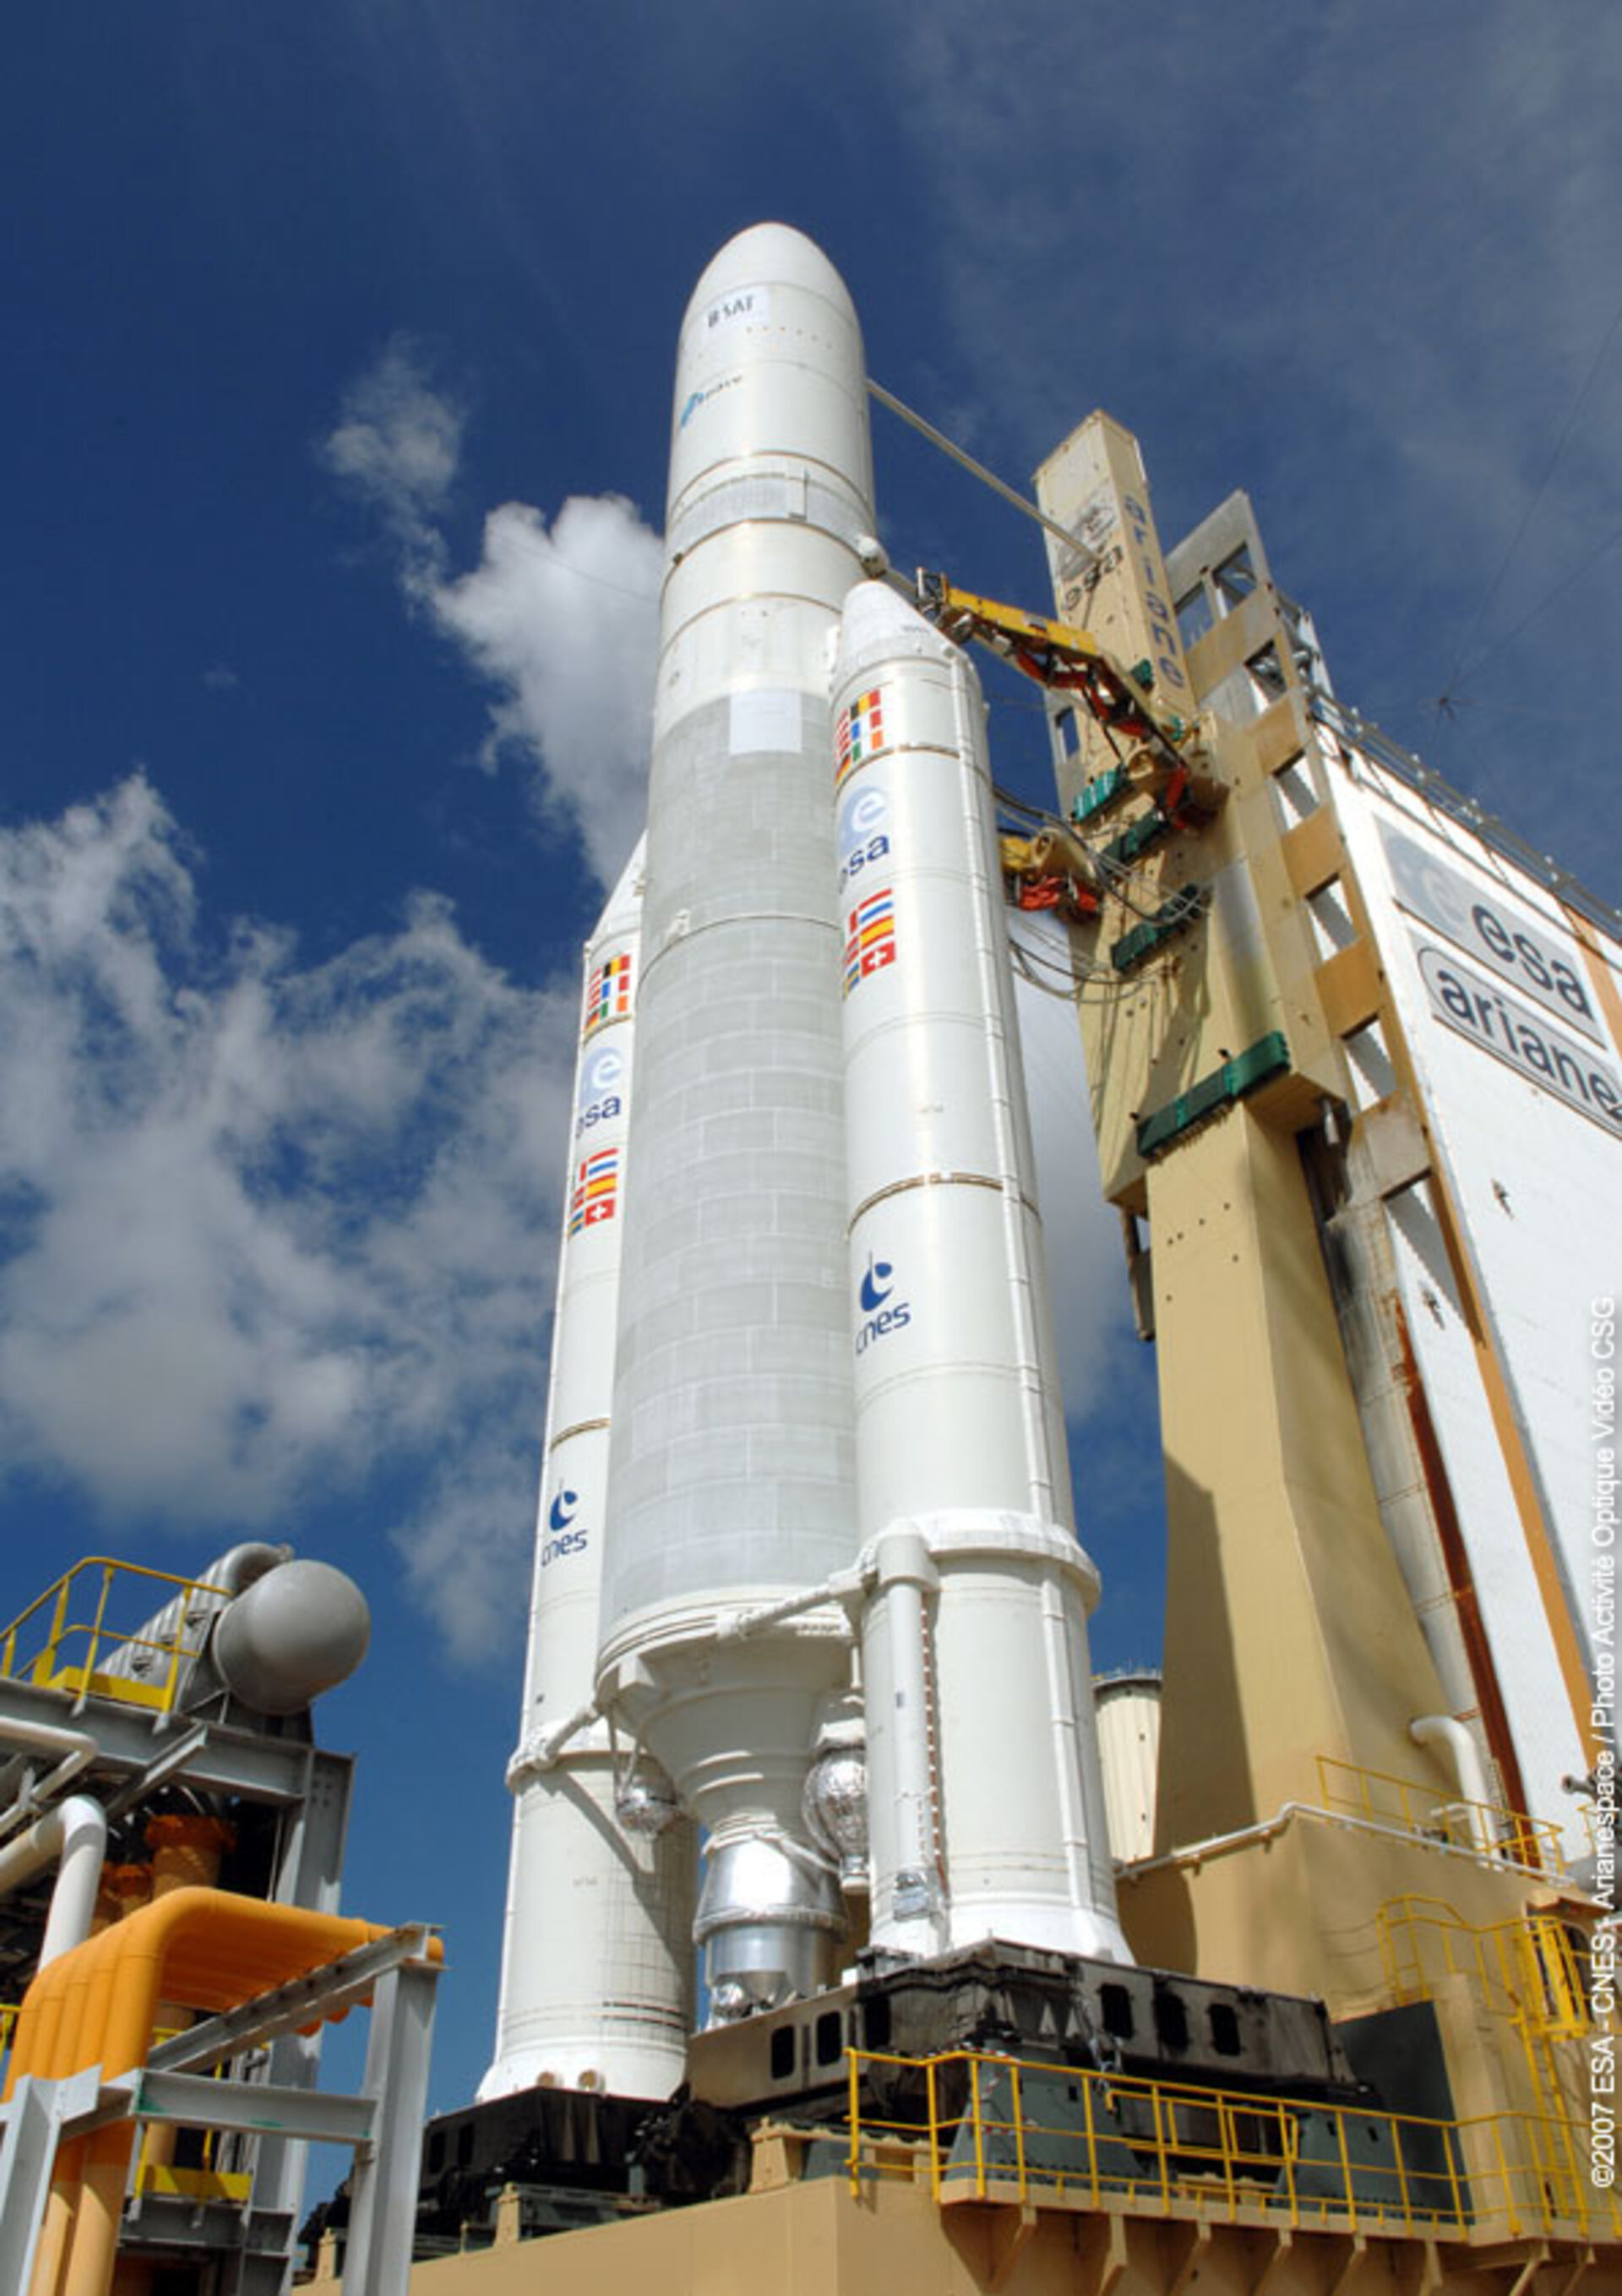 Ariane 5 at the launch site in Kourou